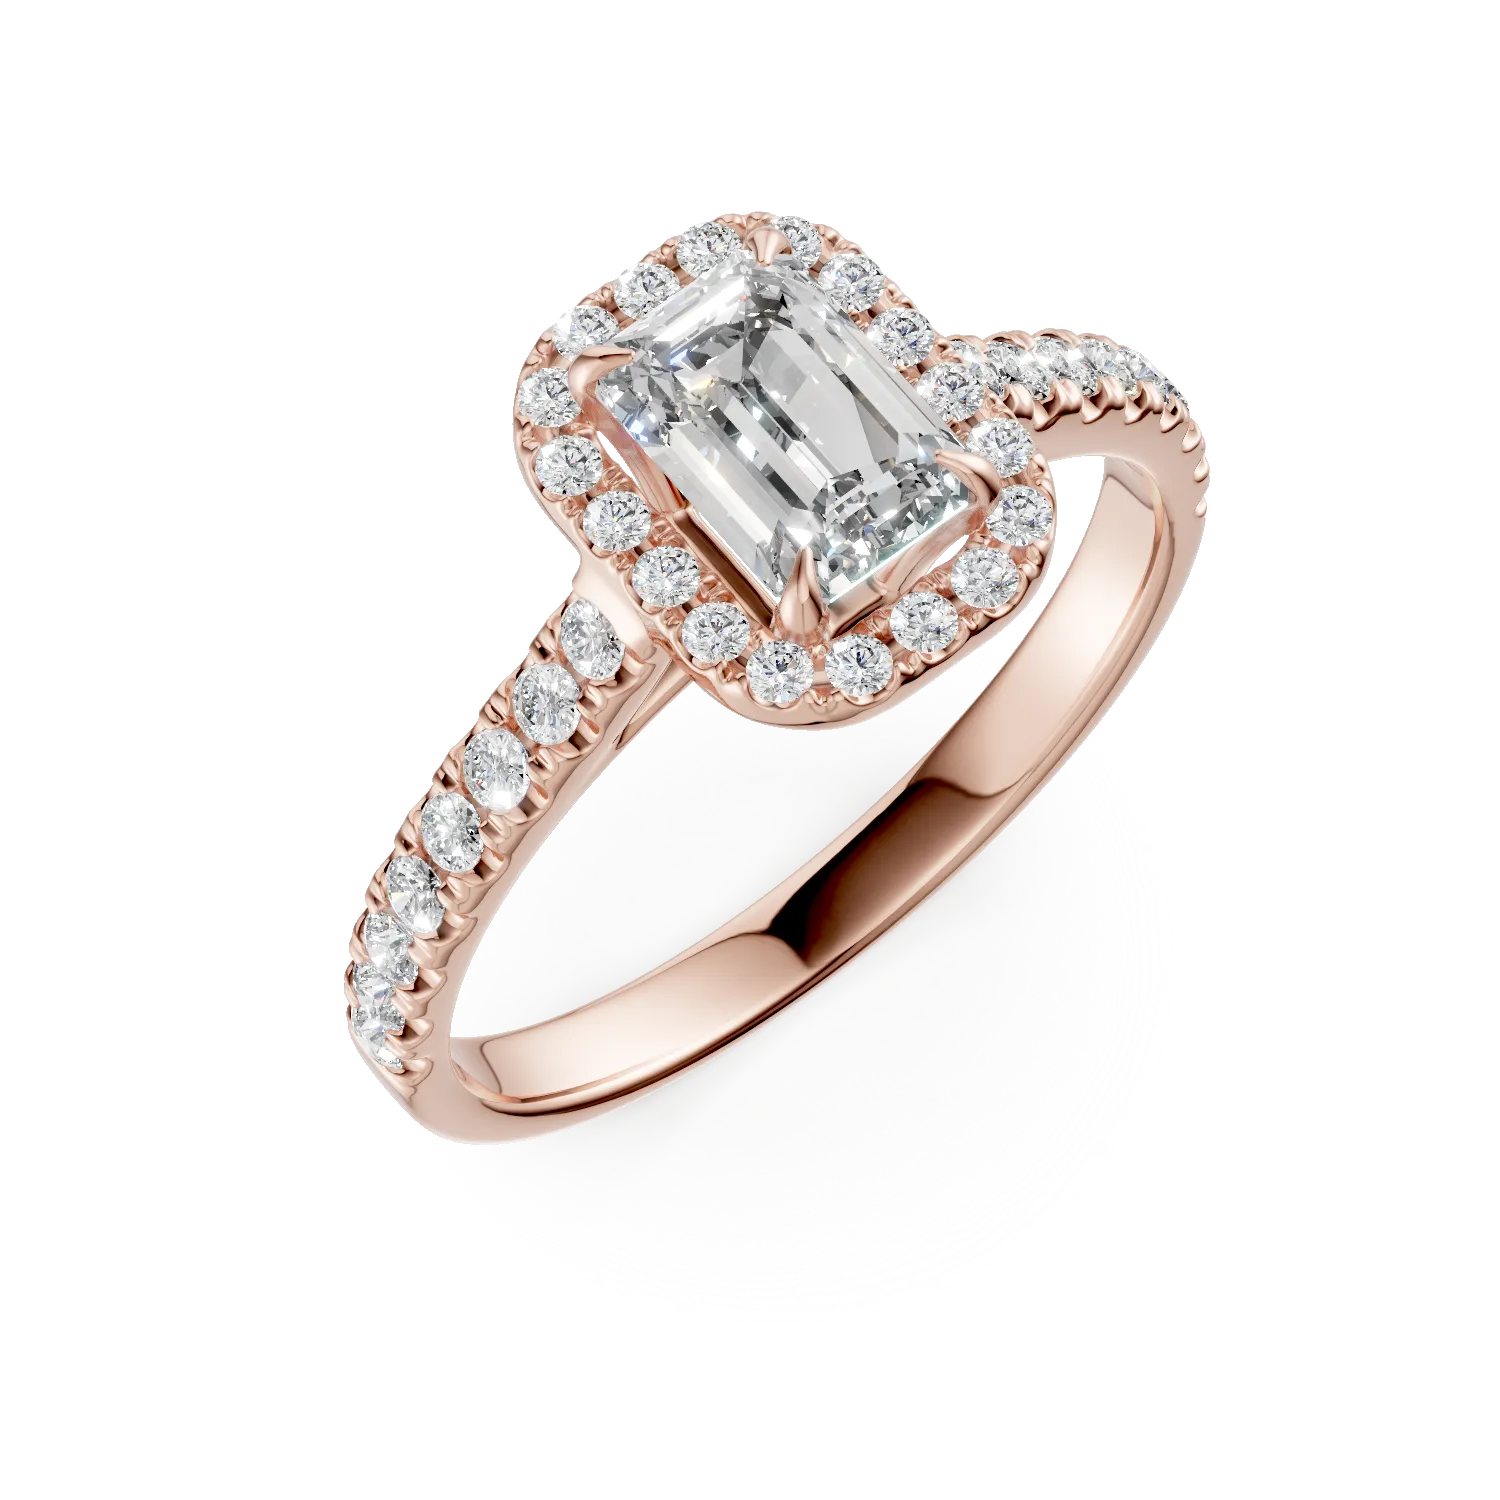 Rose gold engagement ring with 0.81ct diamond and 0.37ct diamonds